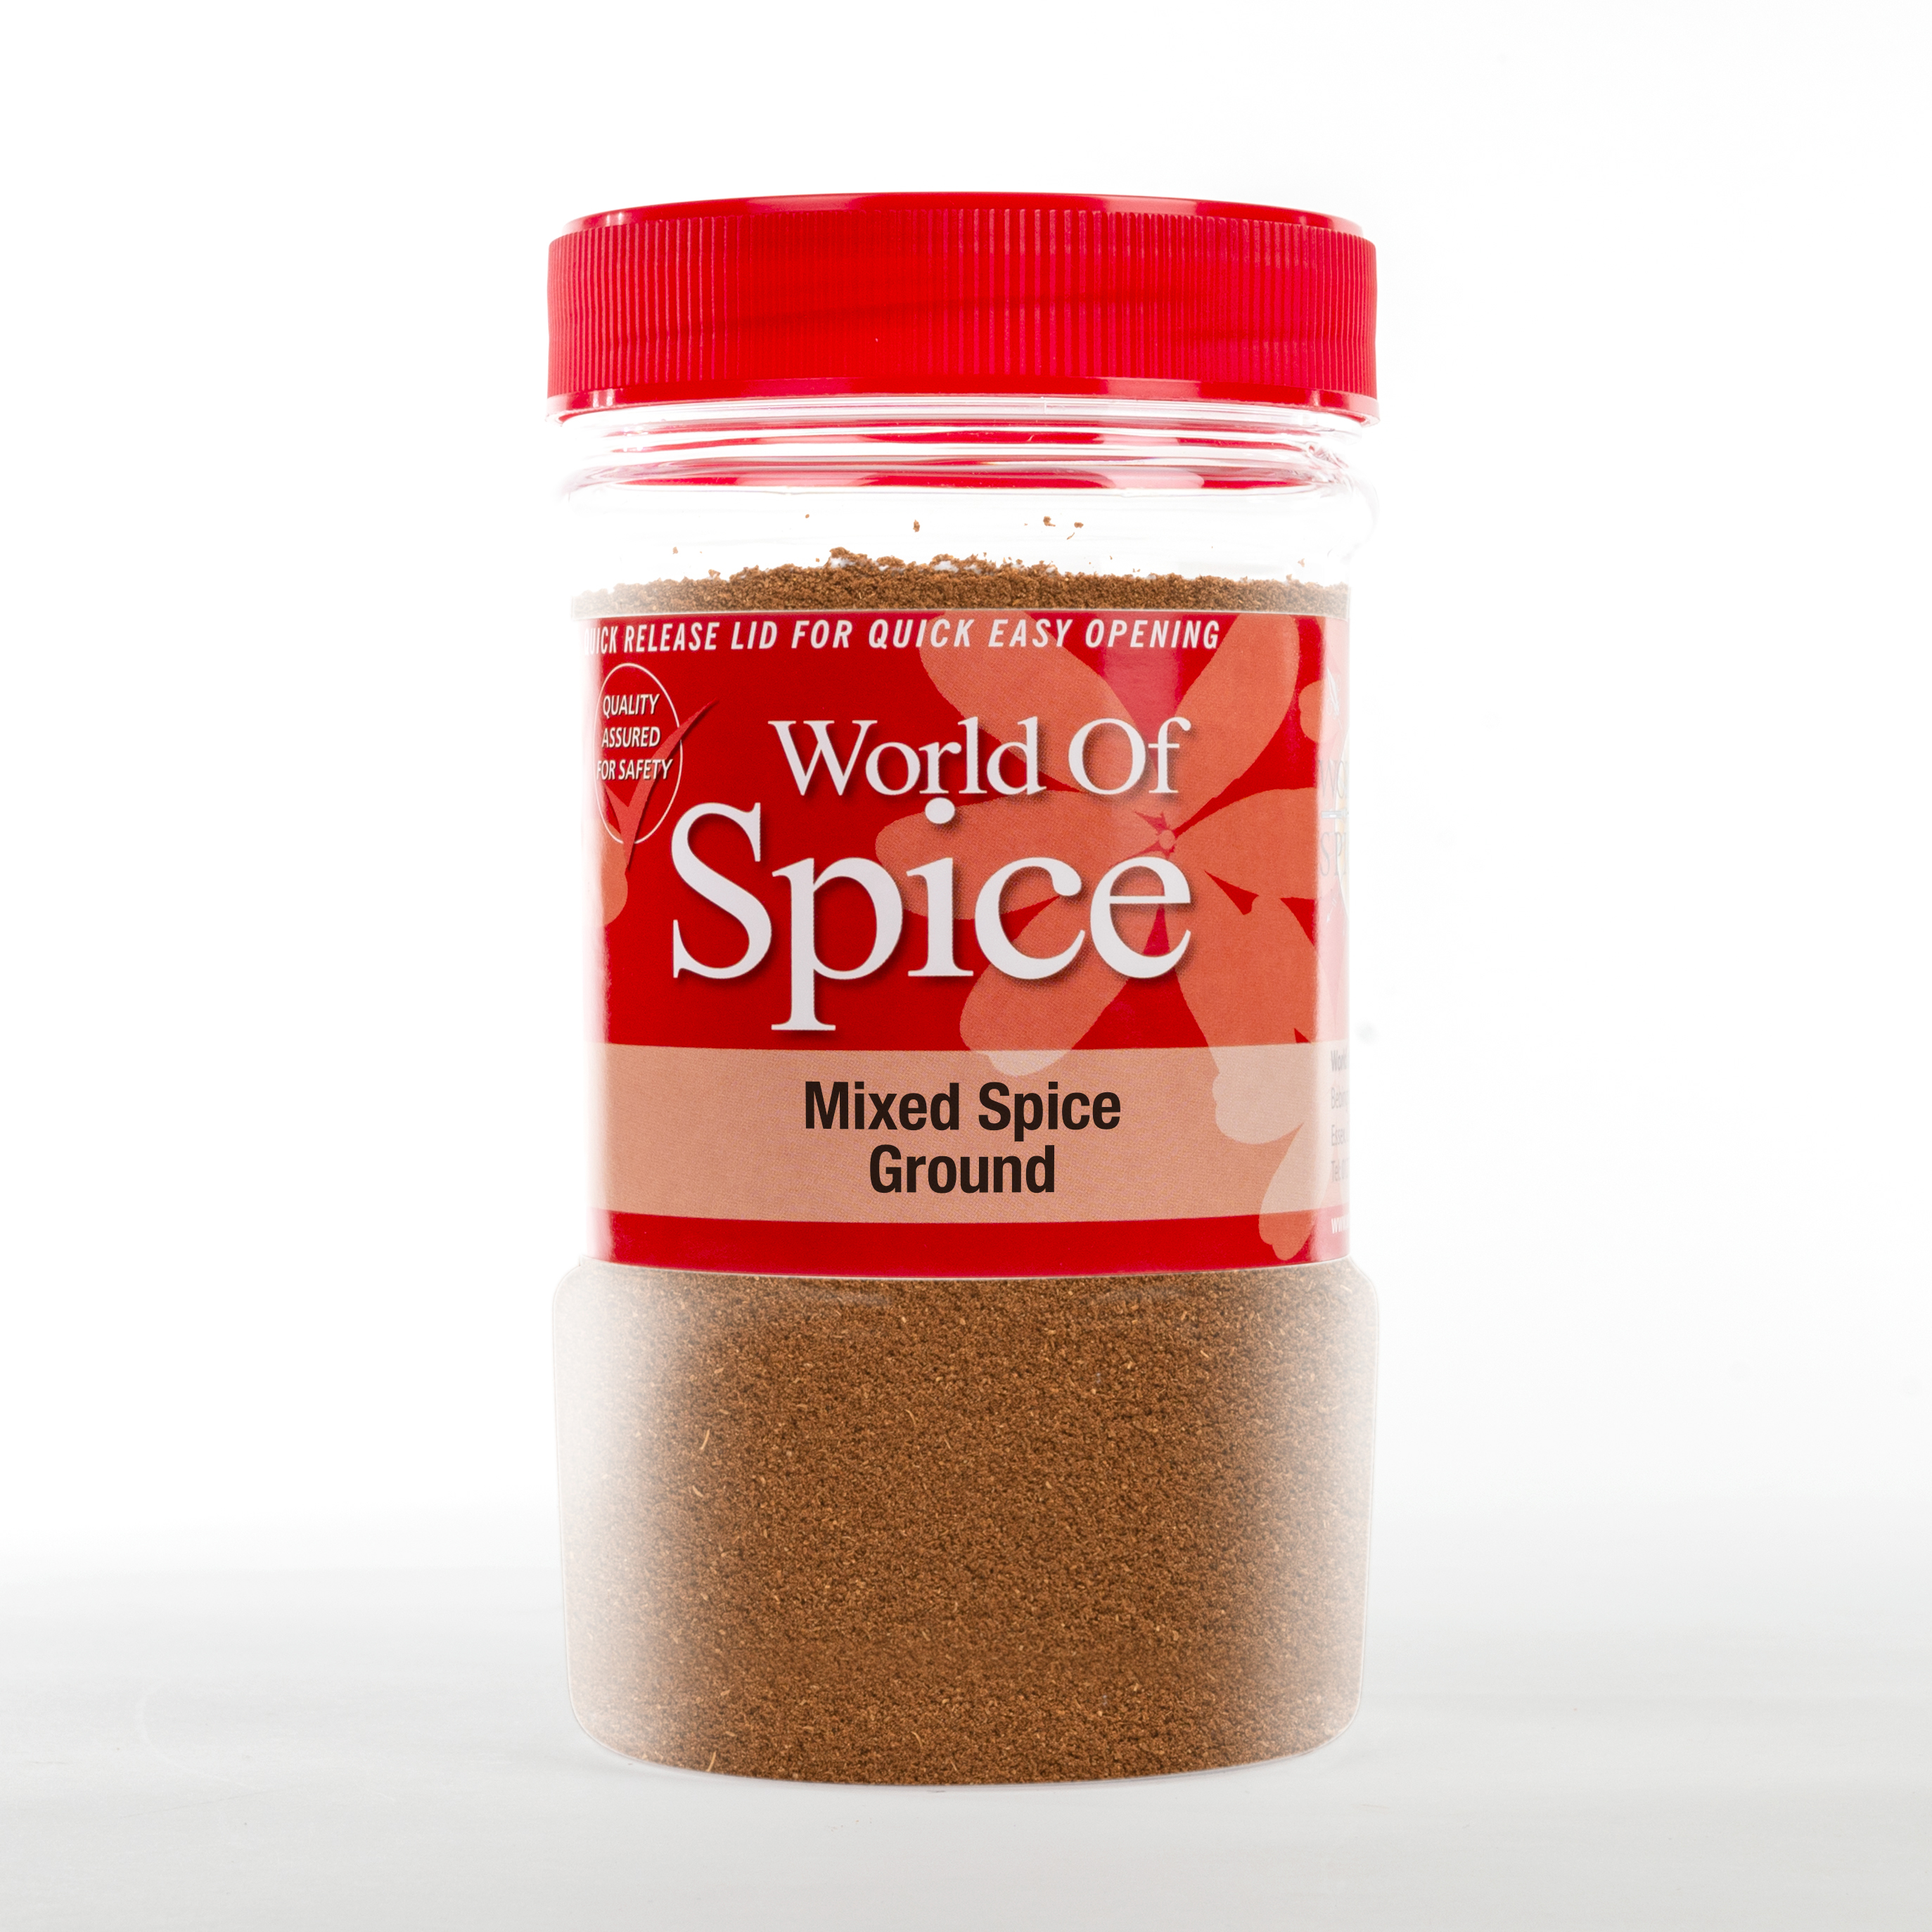 Mixed Spice Ground 1295